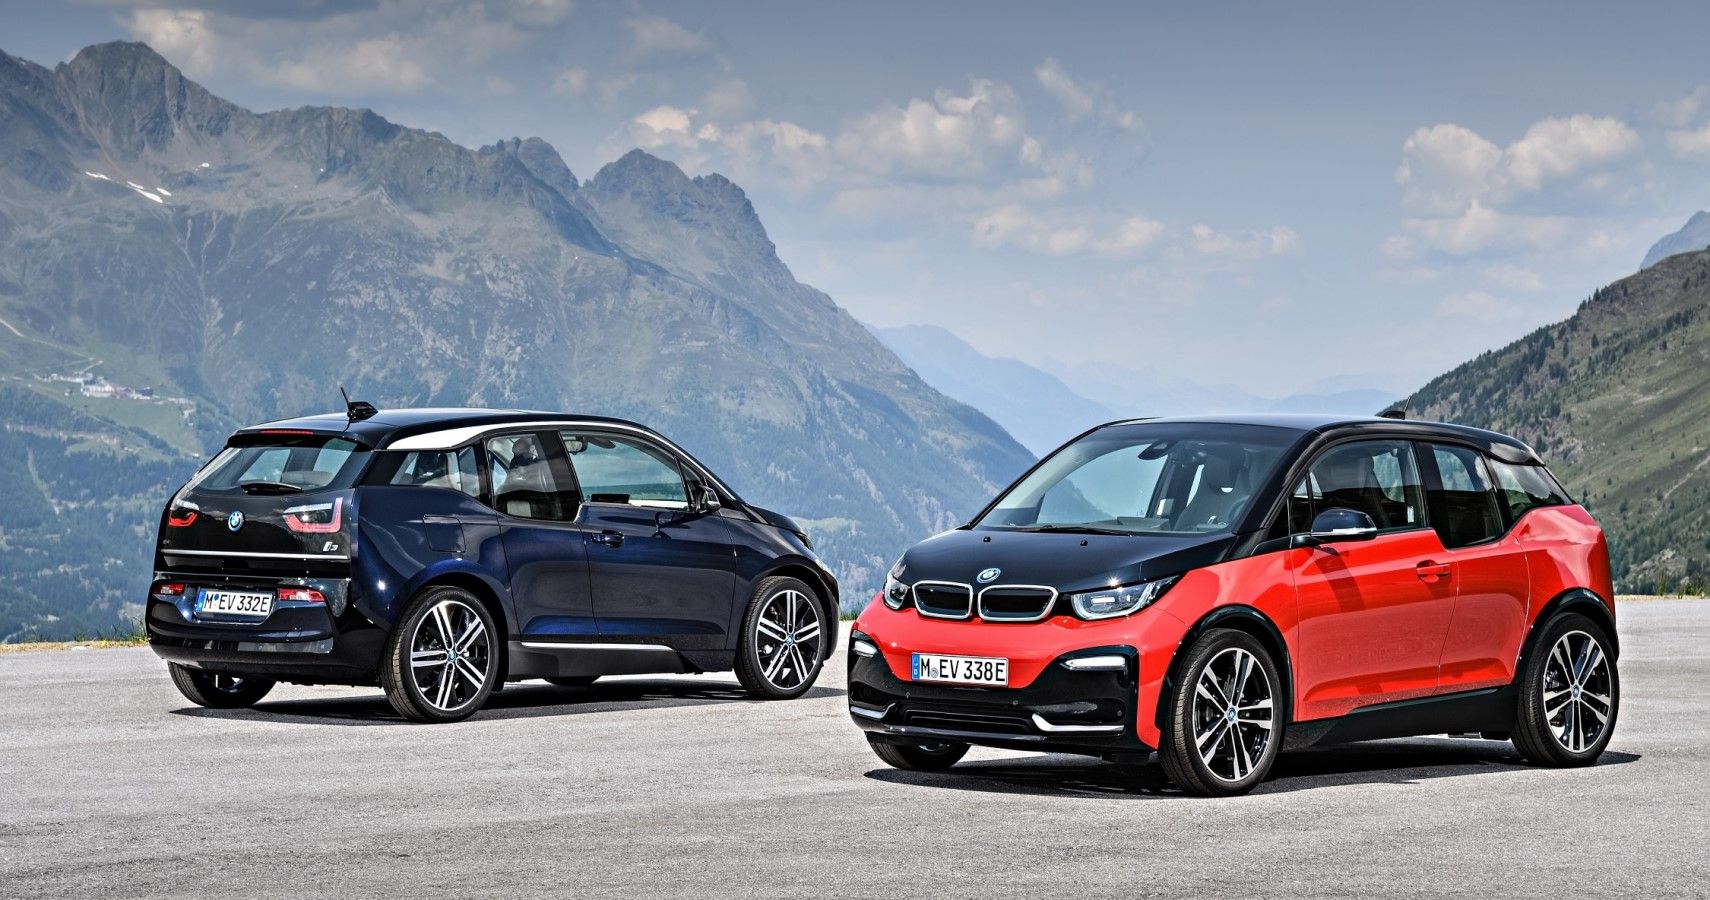 BMW i3 and i3s front and rear image